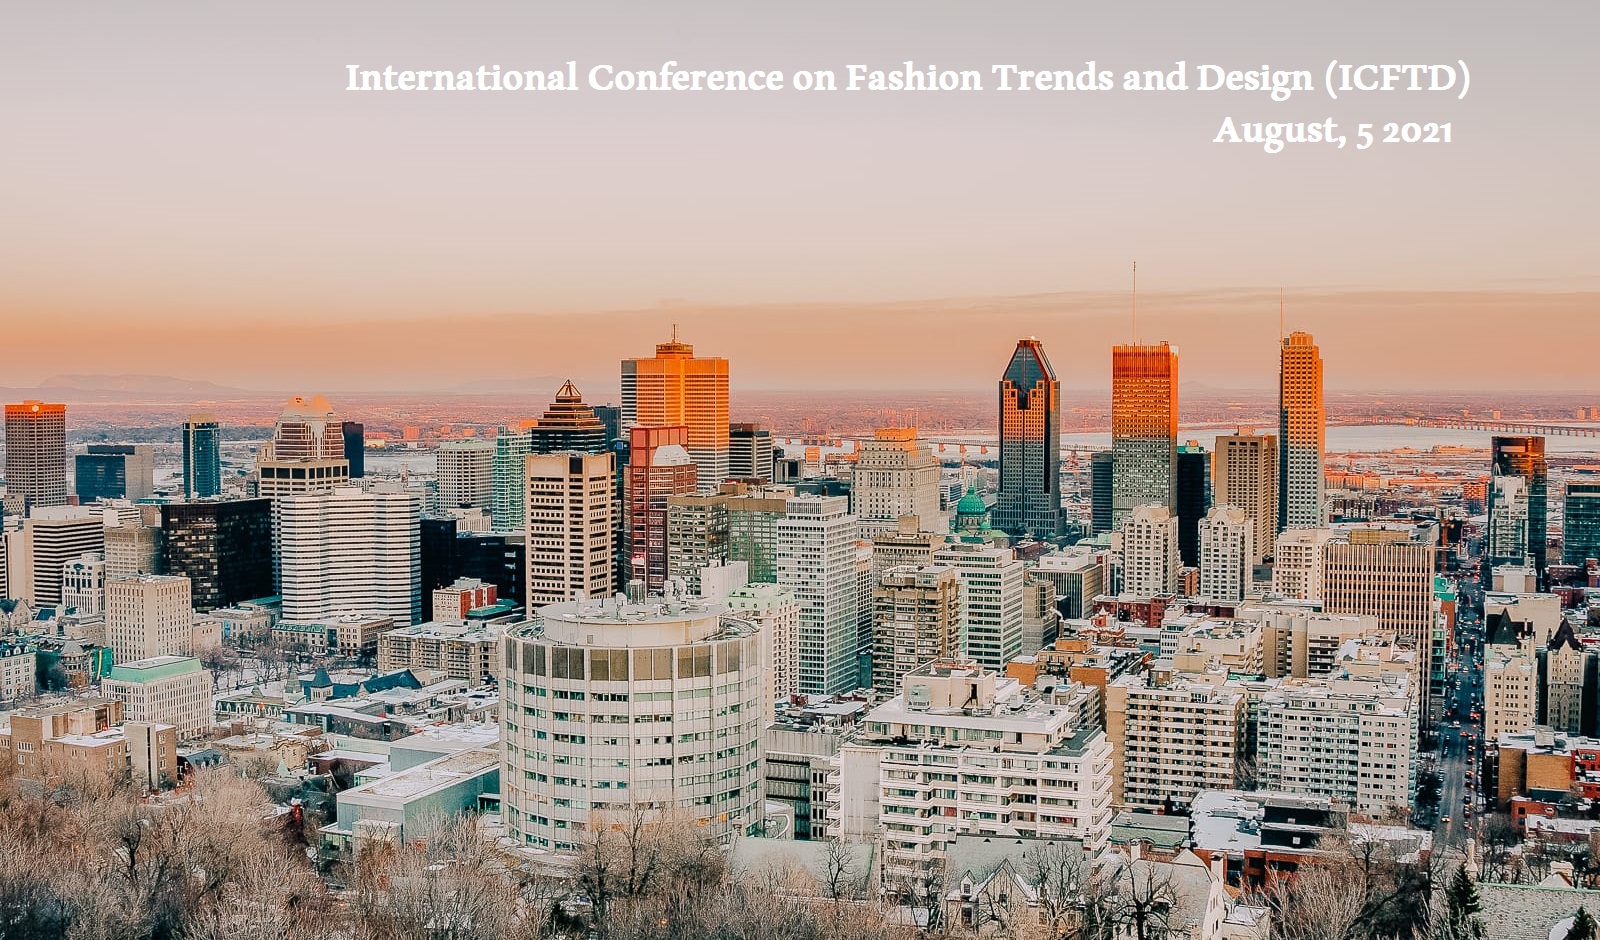 International Conference on Fashion Trends and Design (ICFTD) 2021